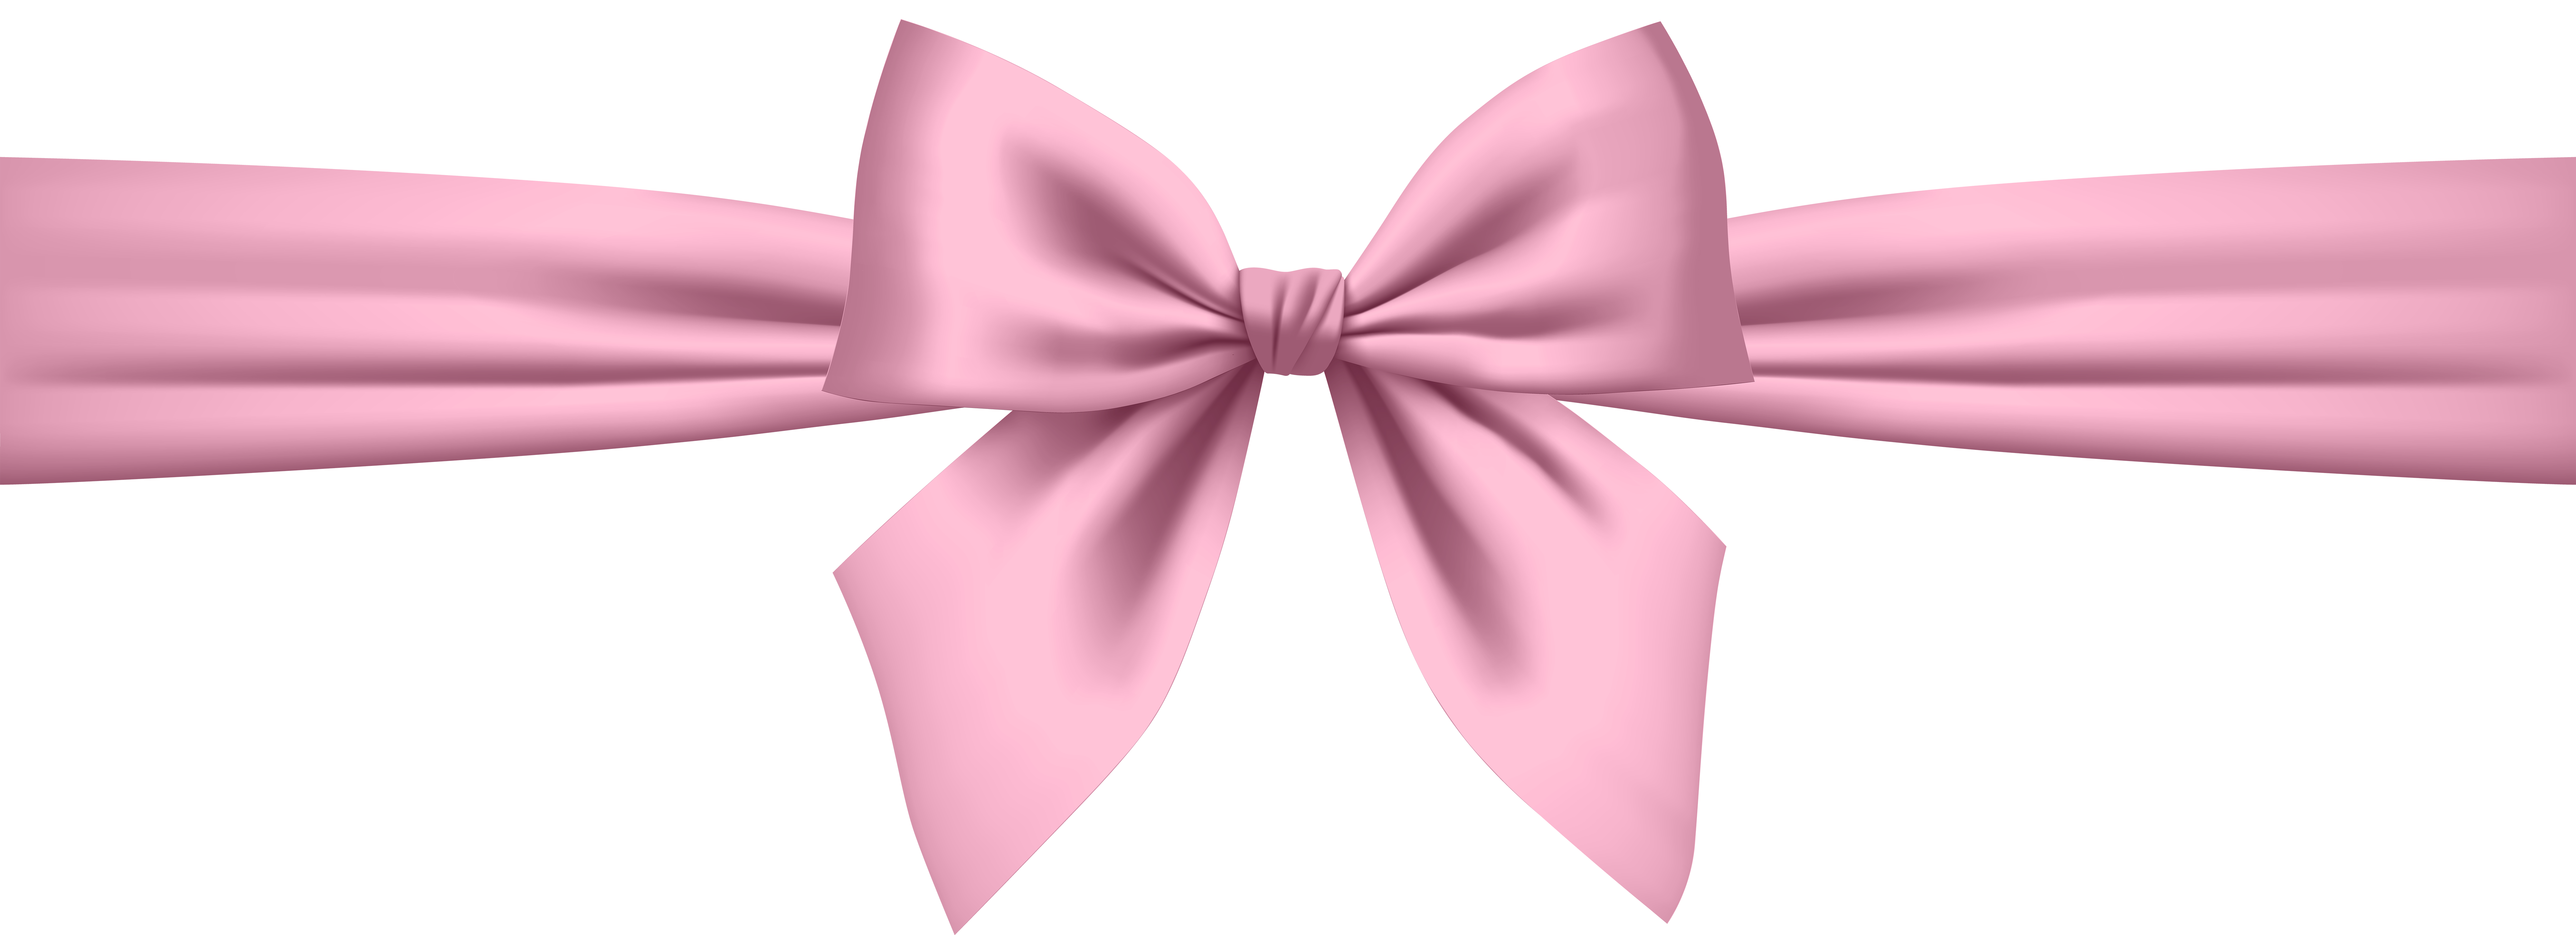 Download Pink Bow Clipart Pics - Alade